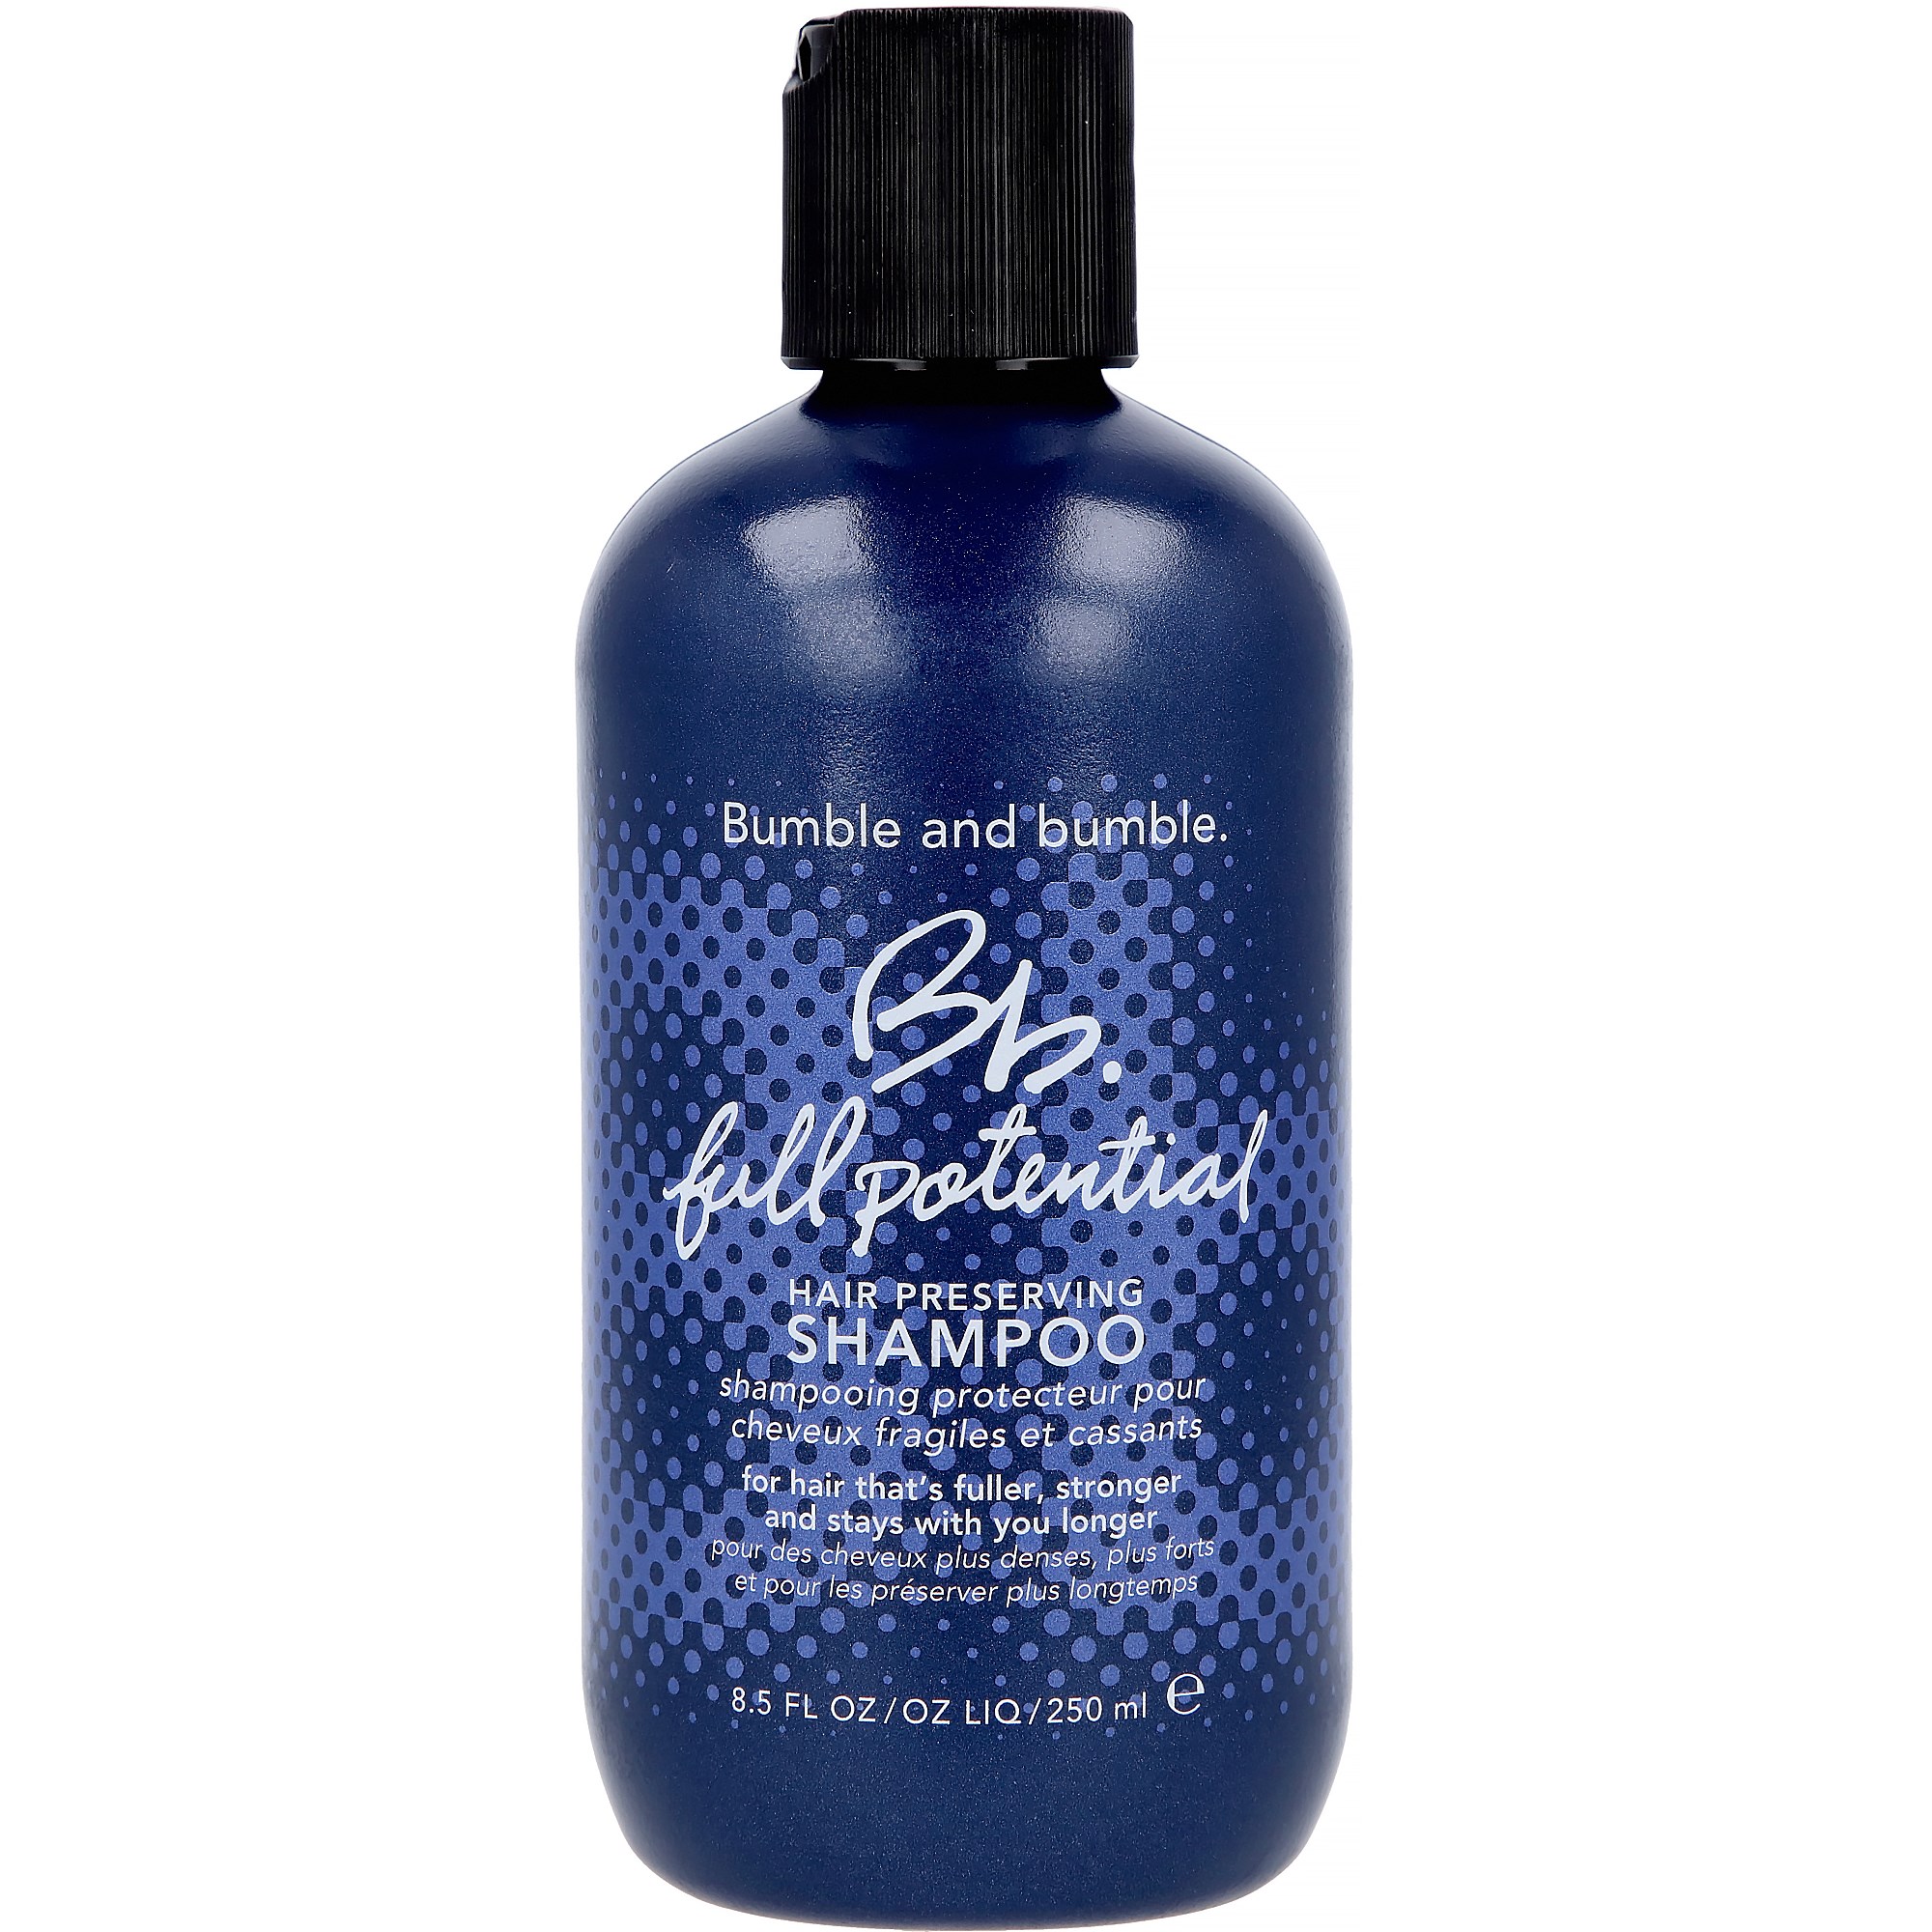 Läs mer om Bumble and bumble Full Potential Hair 250 ml